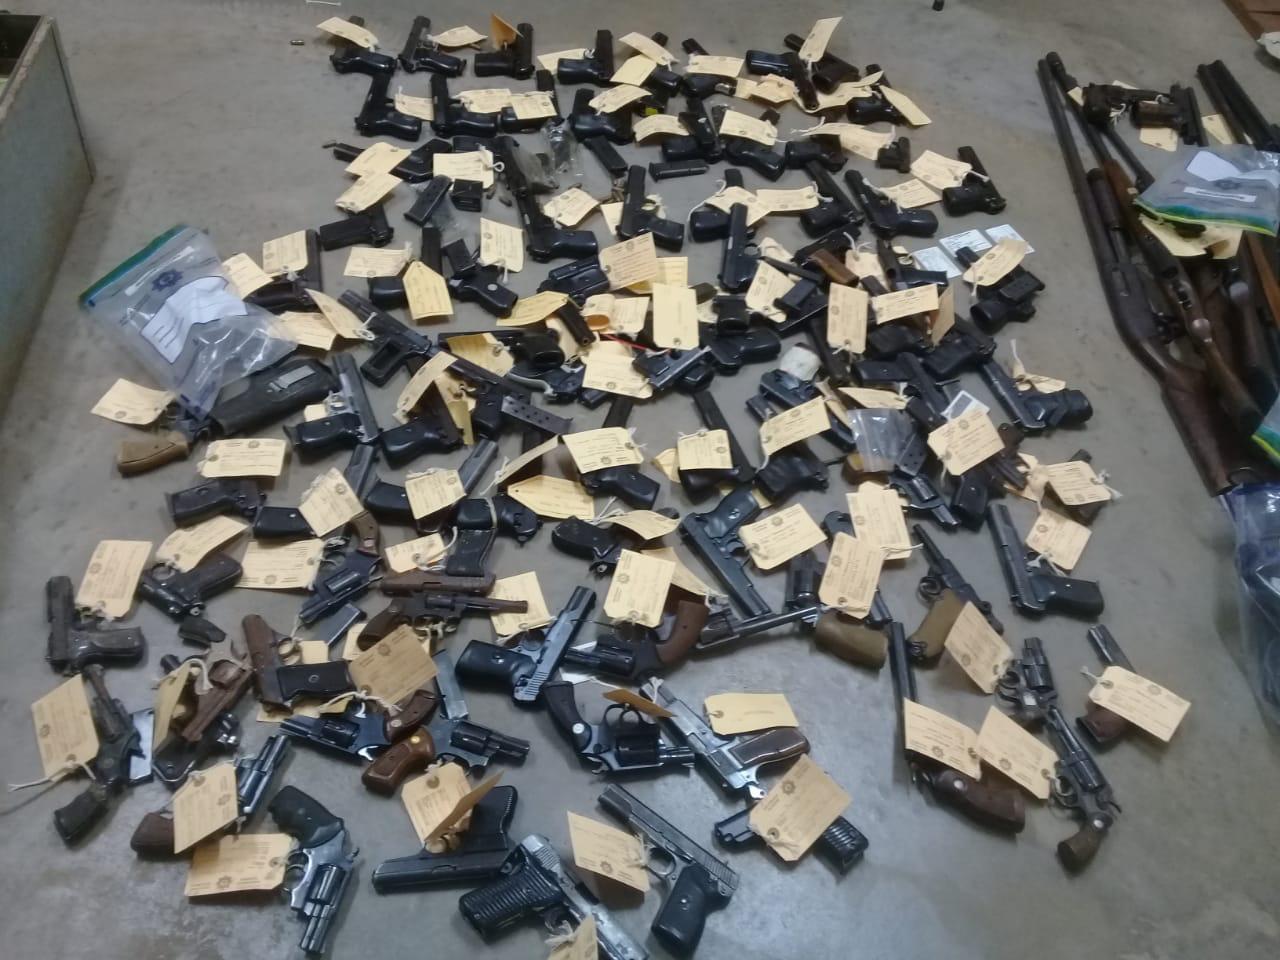 Limpopo police hitting hard on security companies who are operating with unlicensed firearms